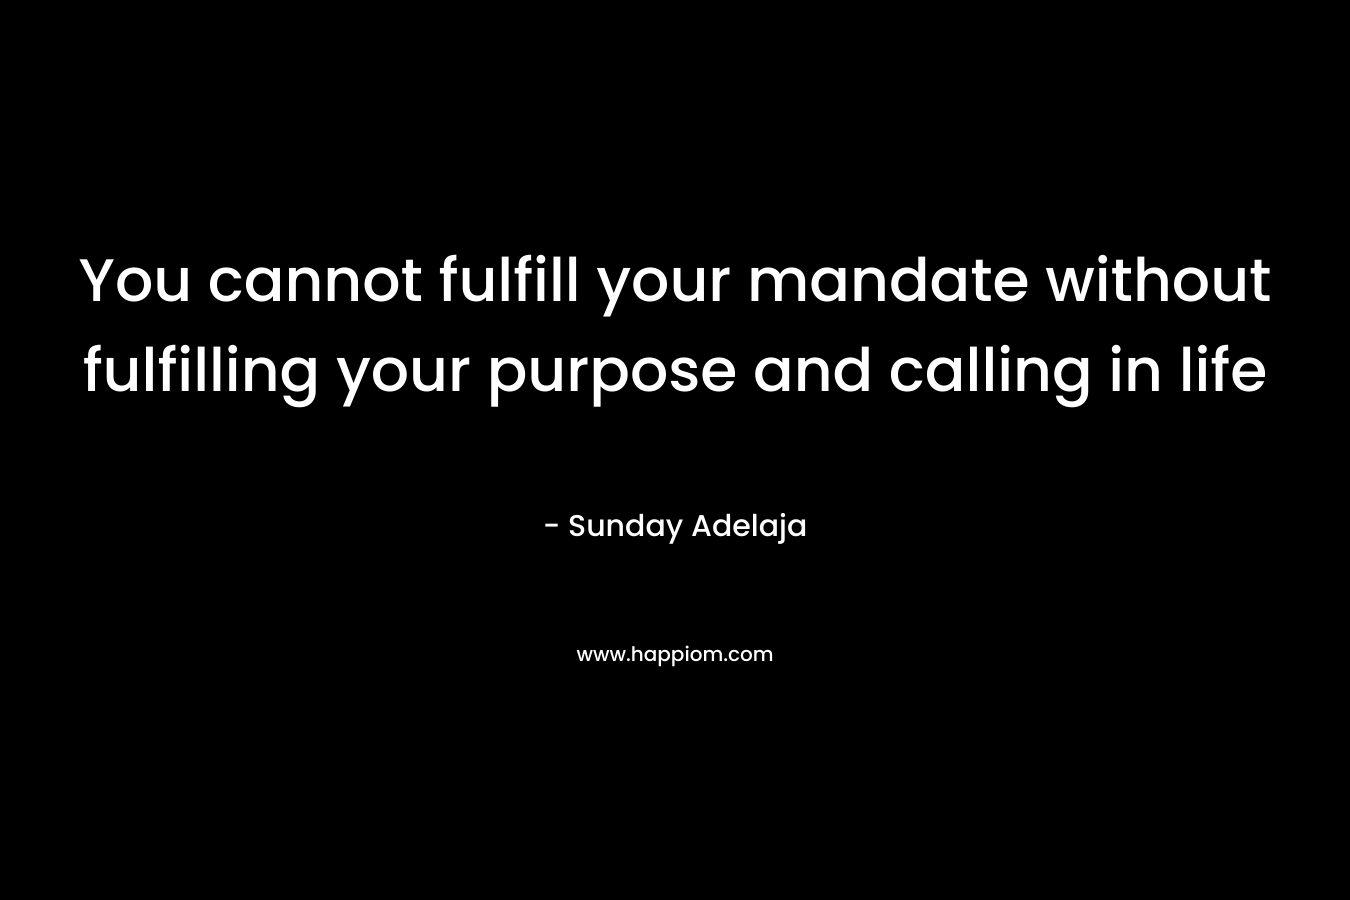 You cannot fulfill your mandate without fulfilling your purpose and calling in life